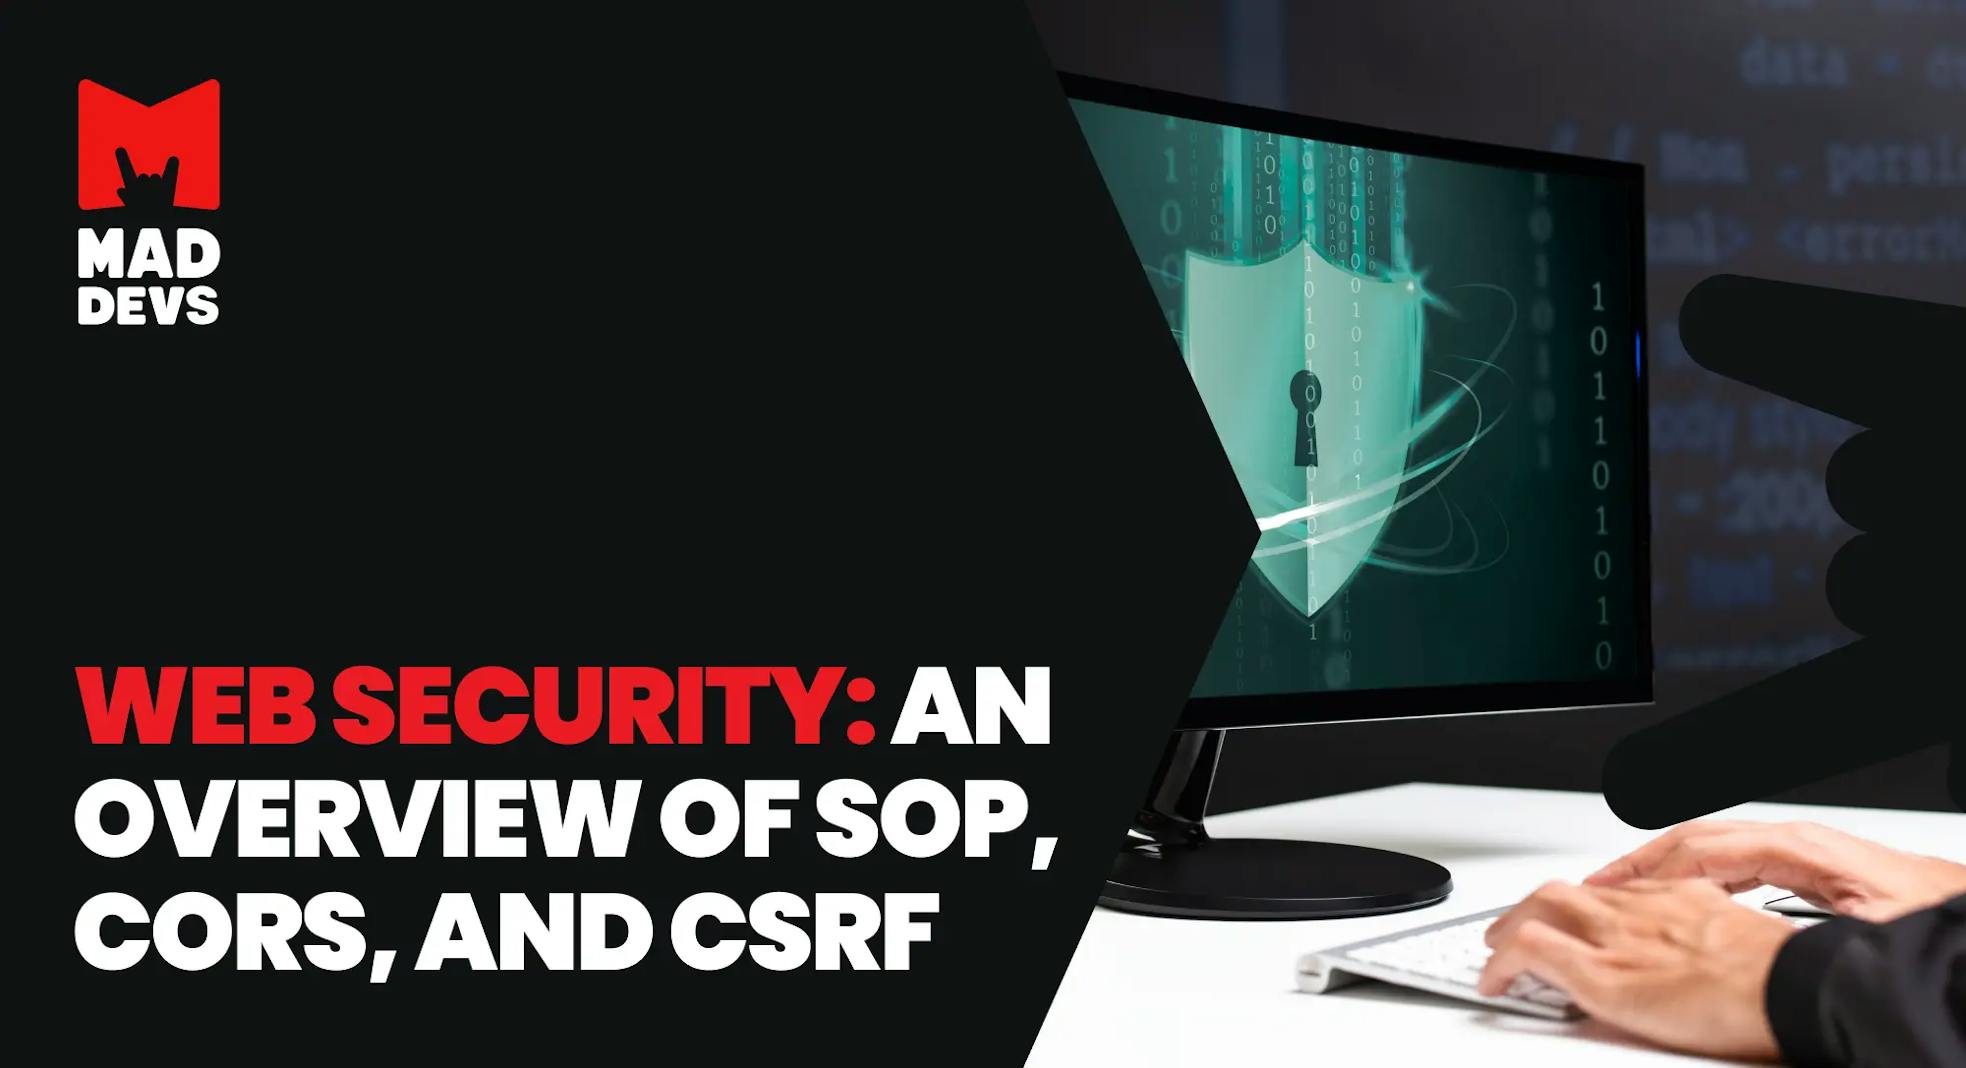 Web Security: an Overview of SOP, CORS, and CSRF